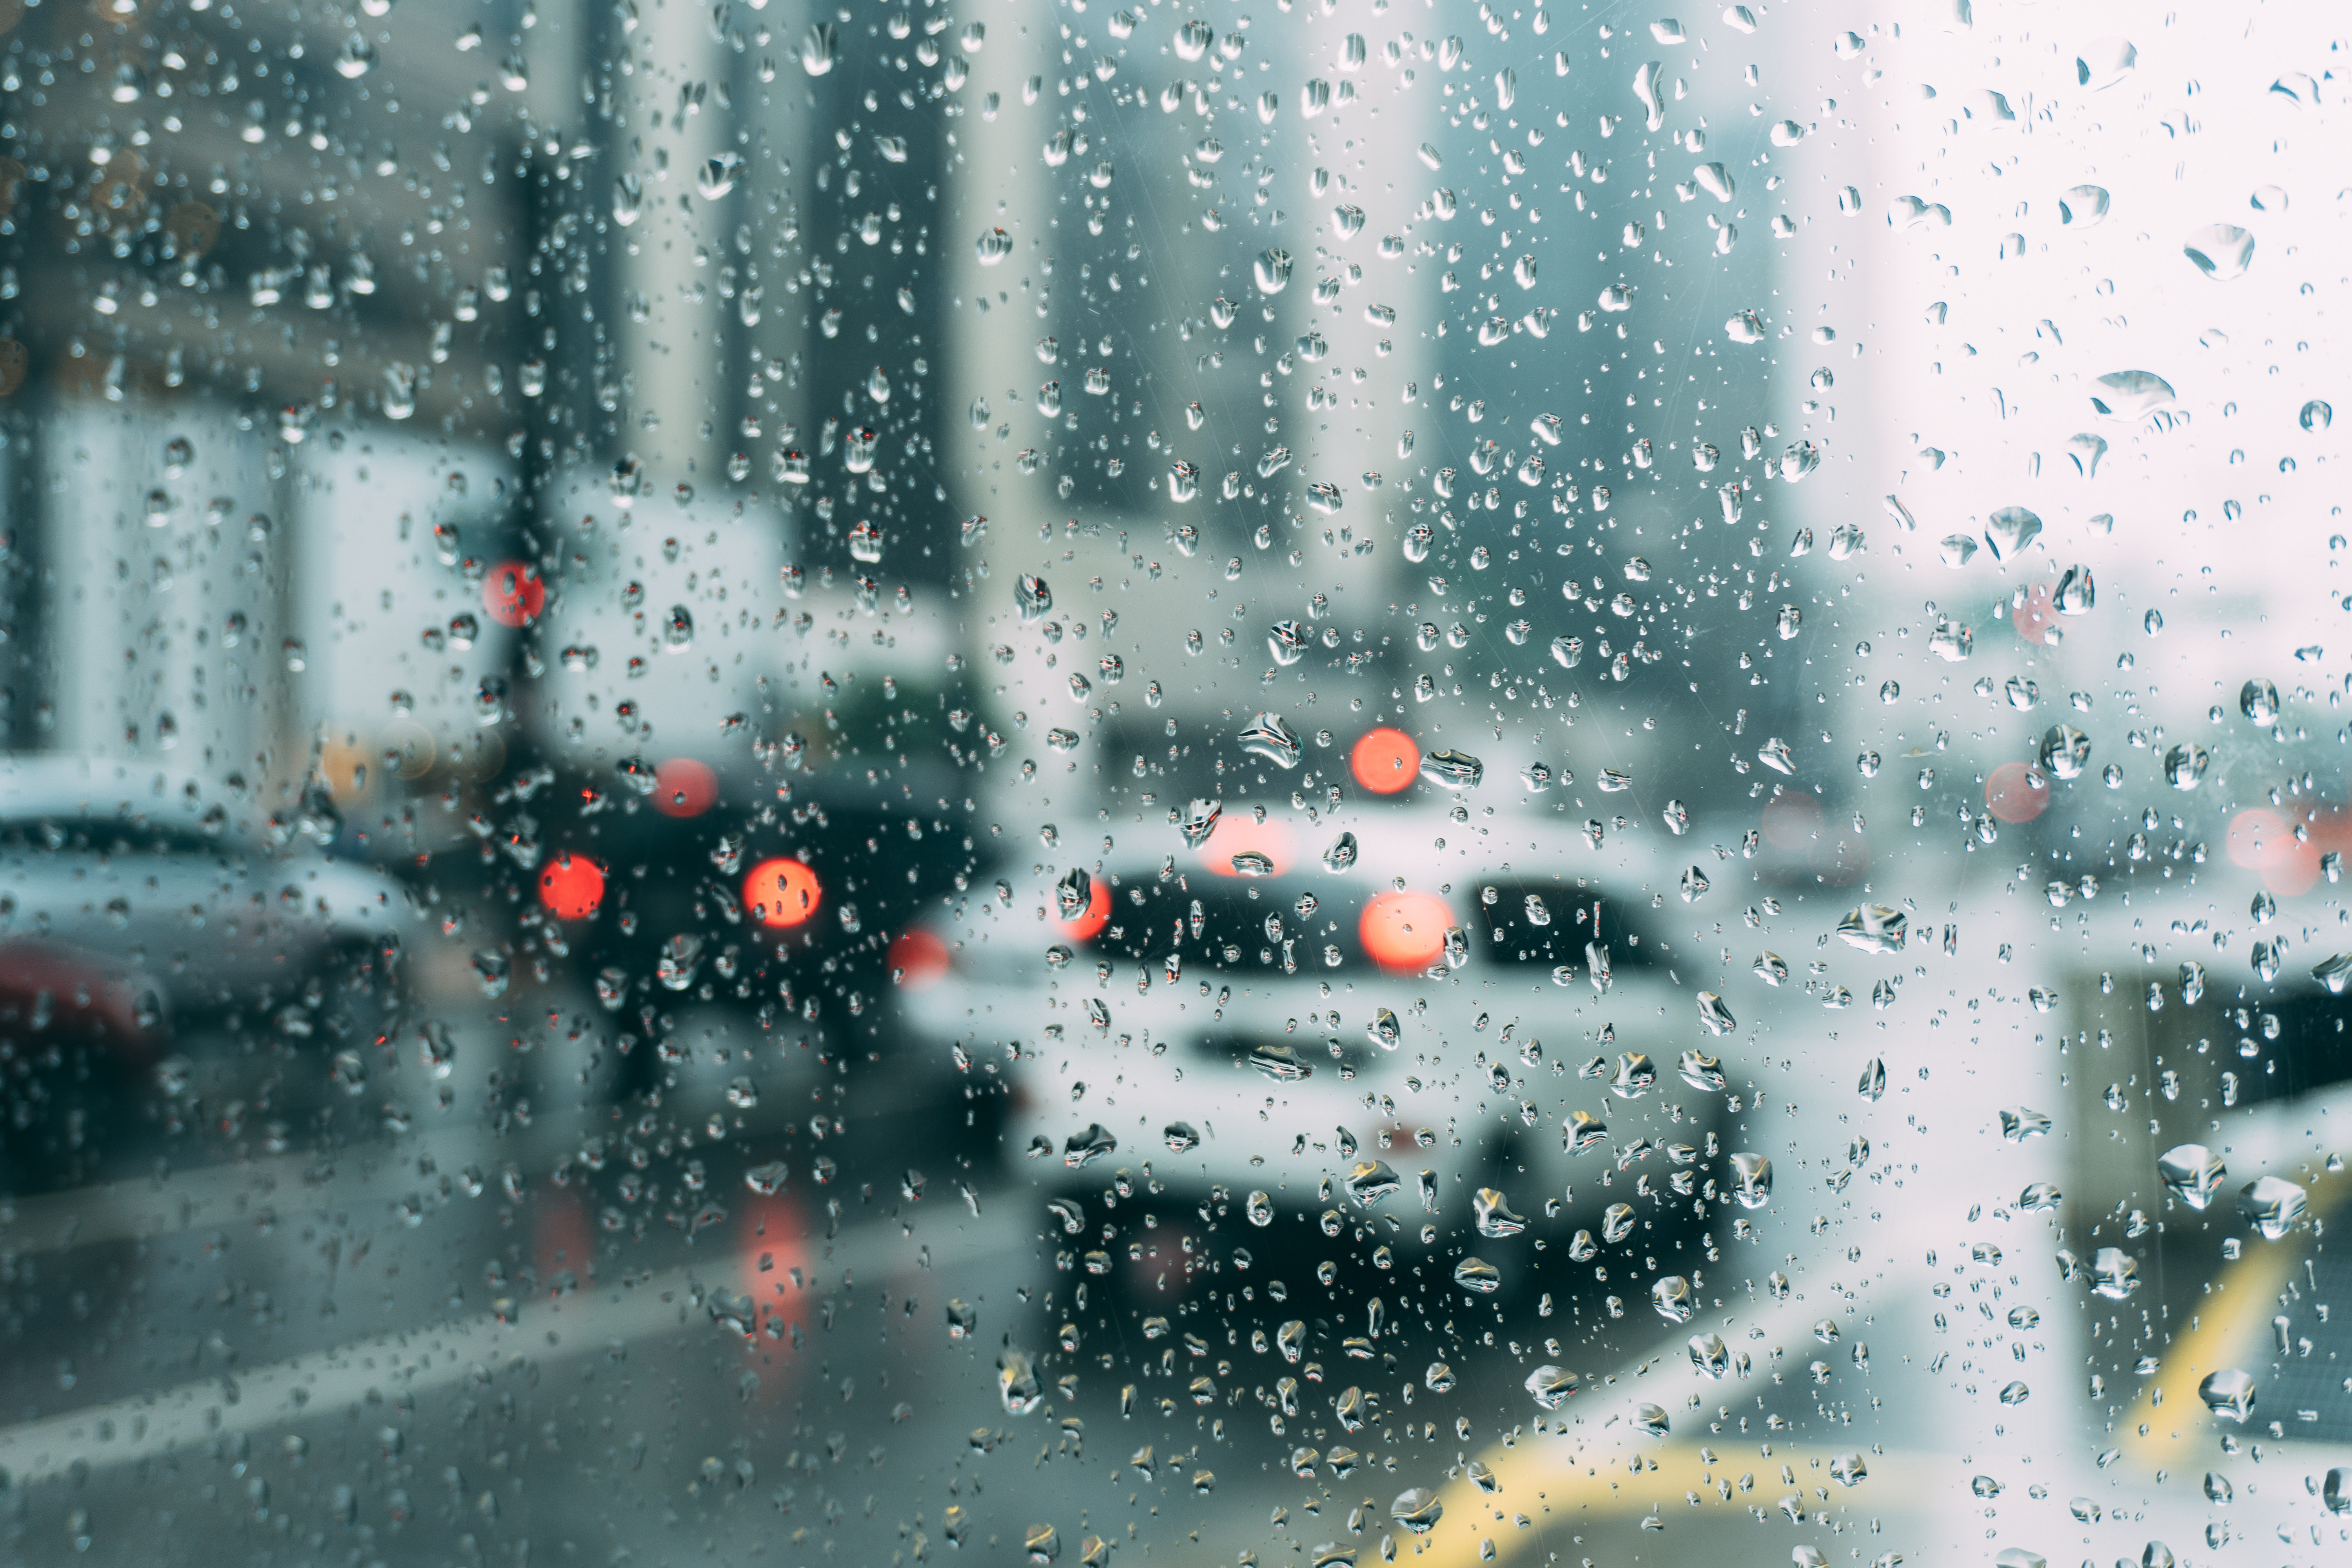 A glass blurred with raindrops on a road